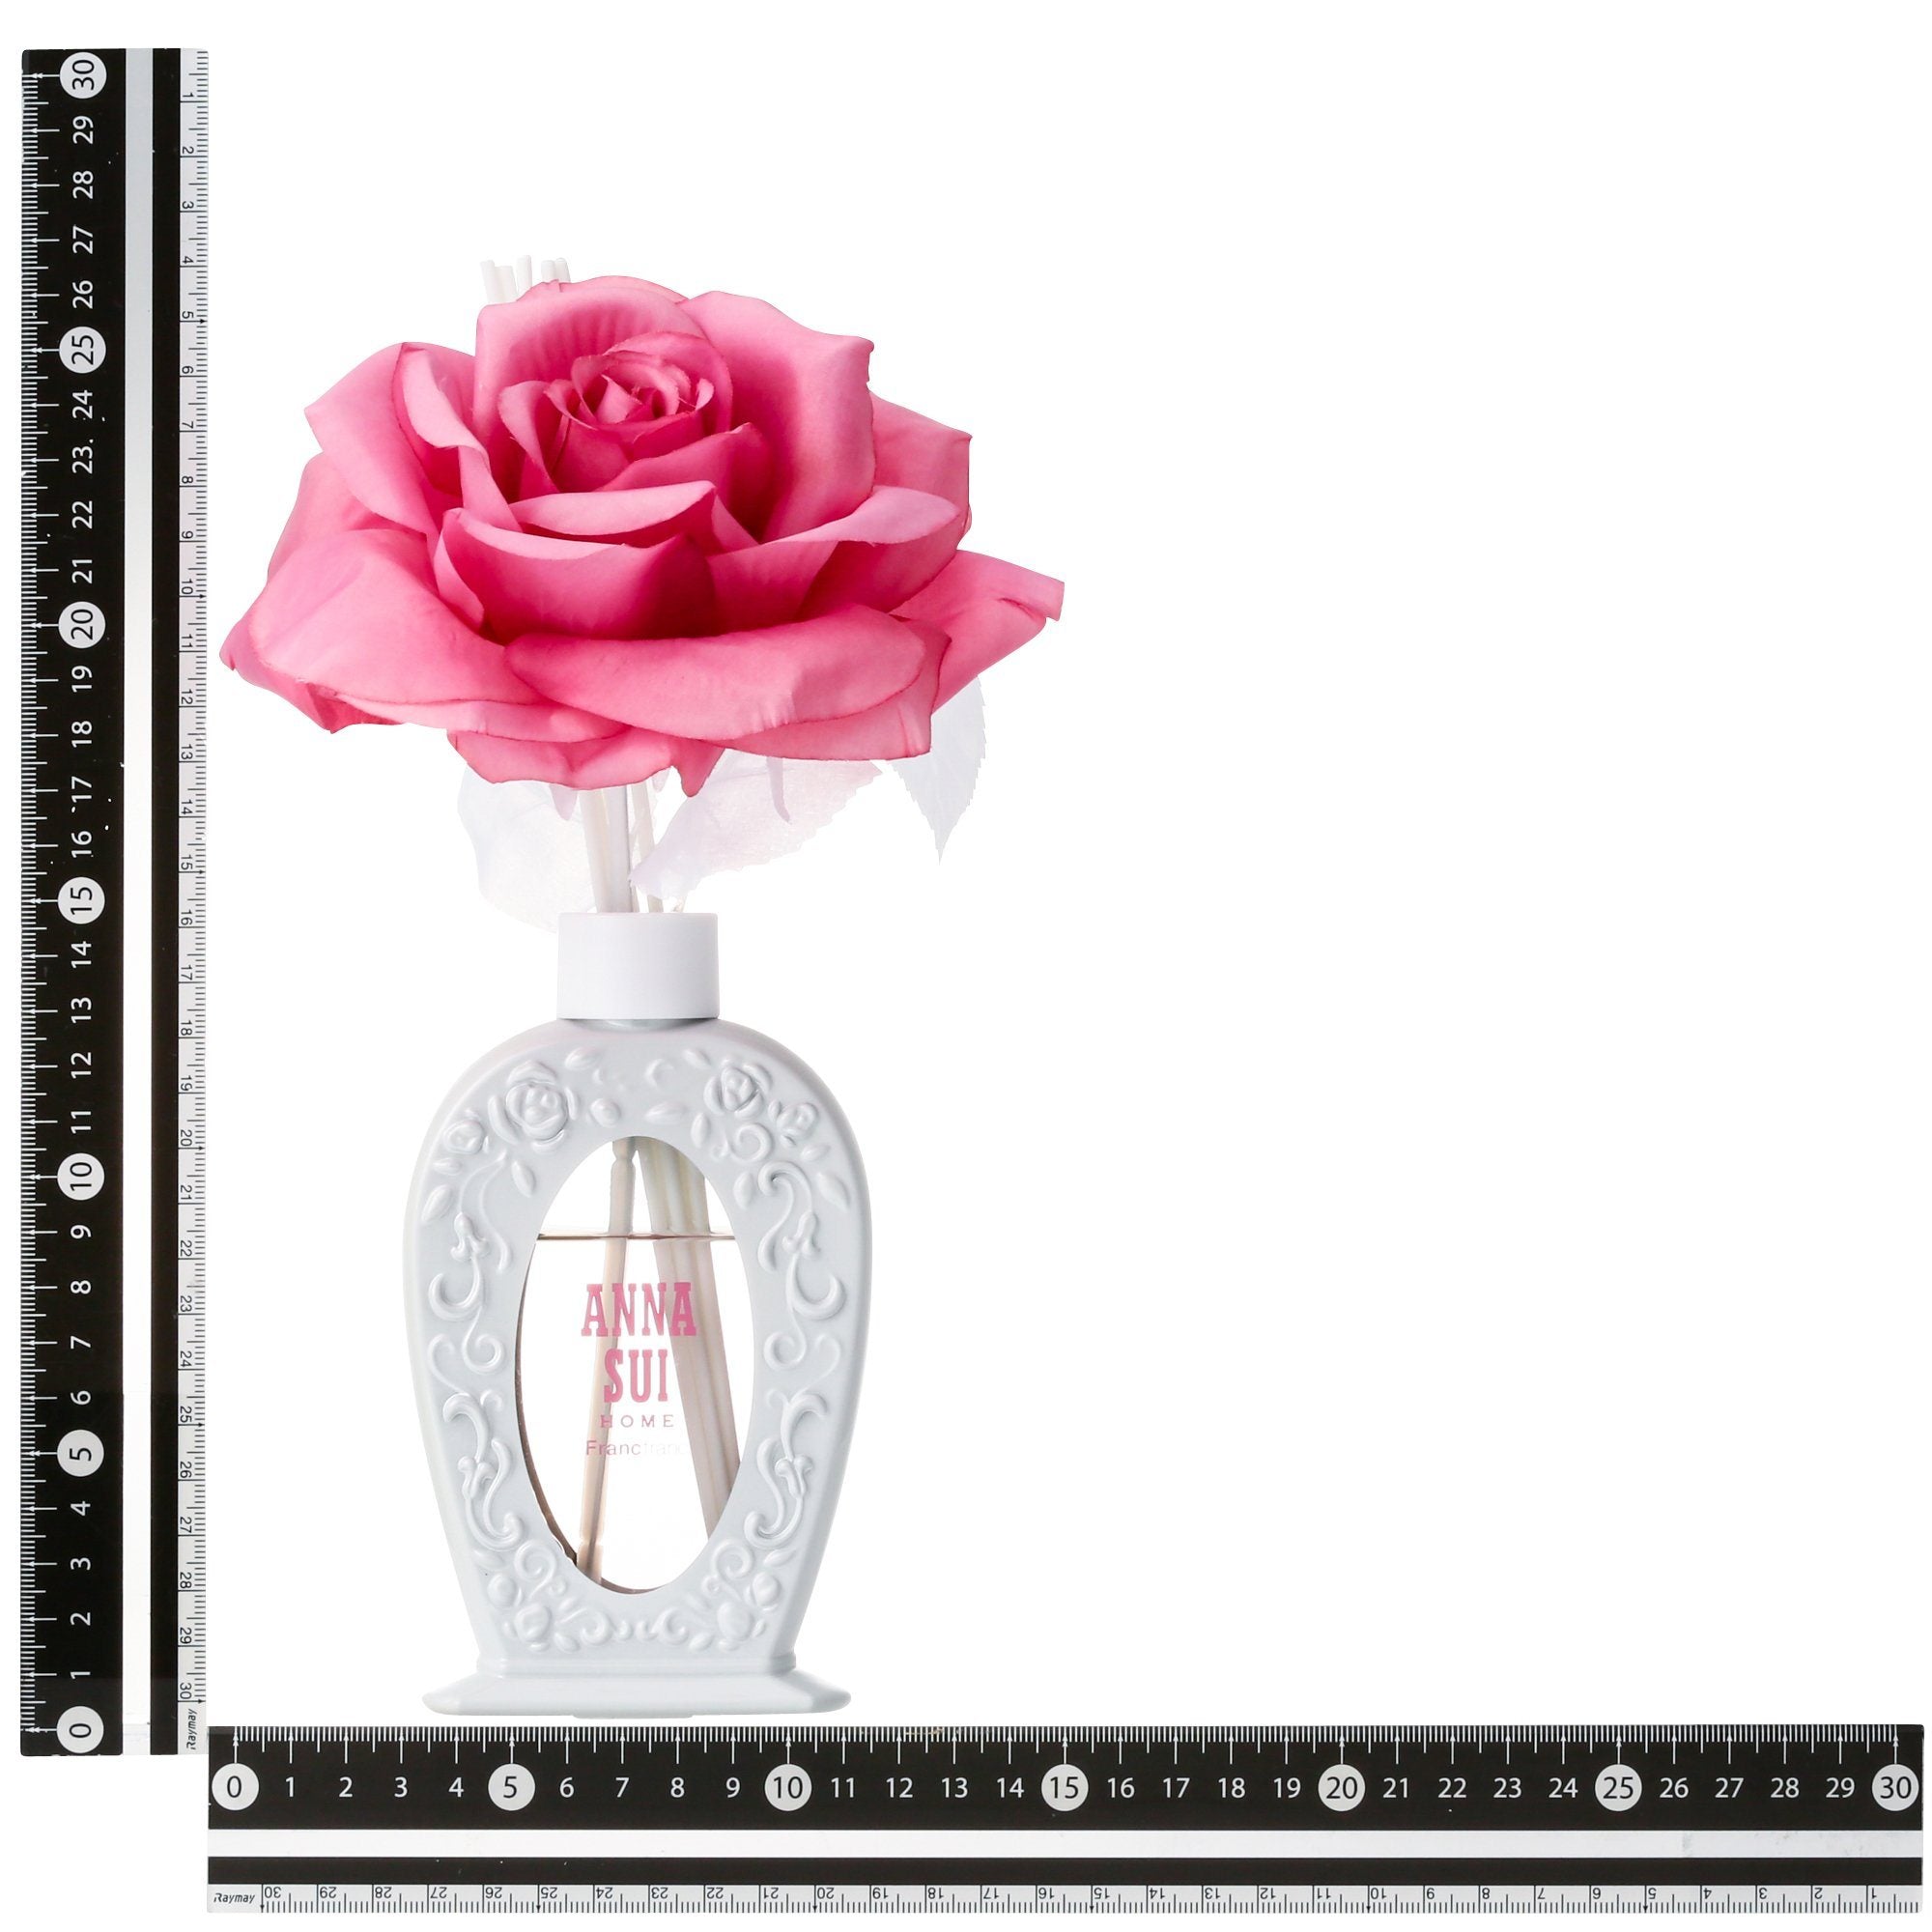 ANNA SUI ROOM FRAGRANCE WHITE